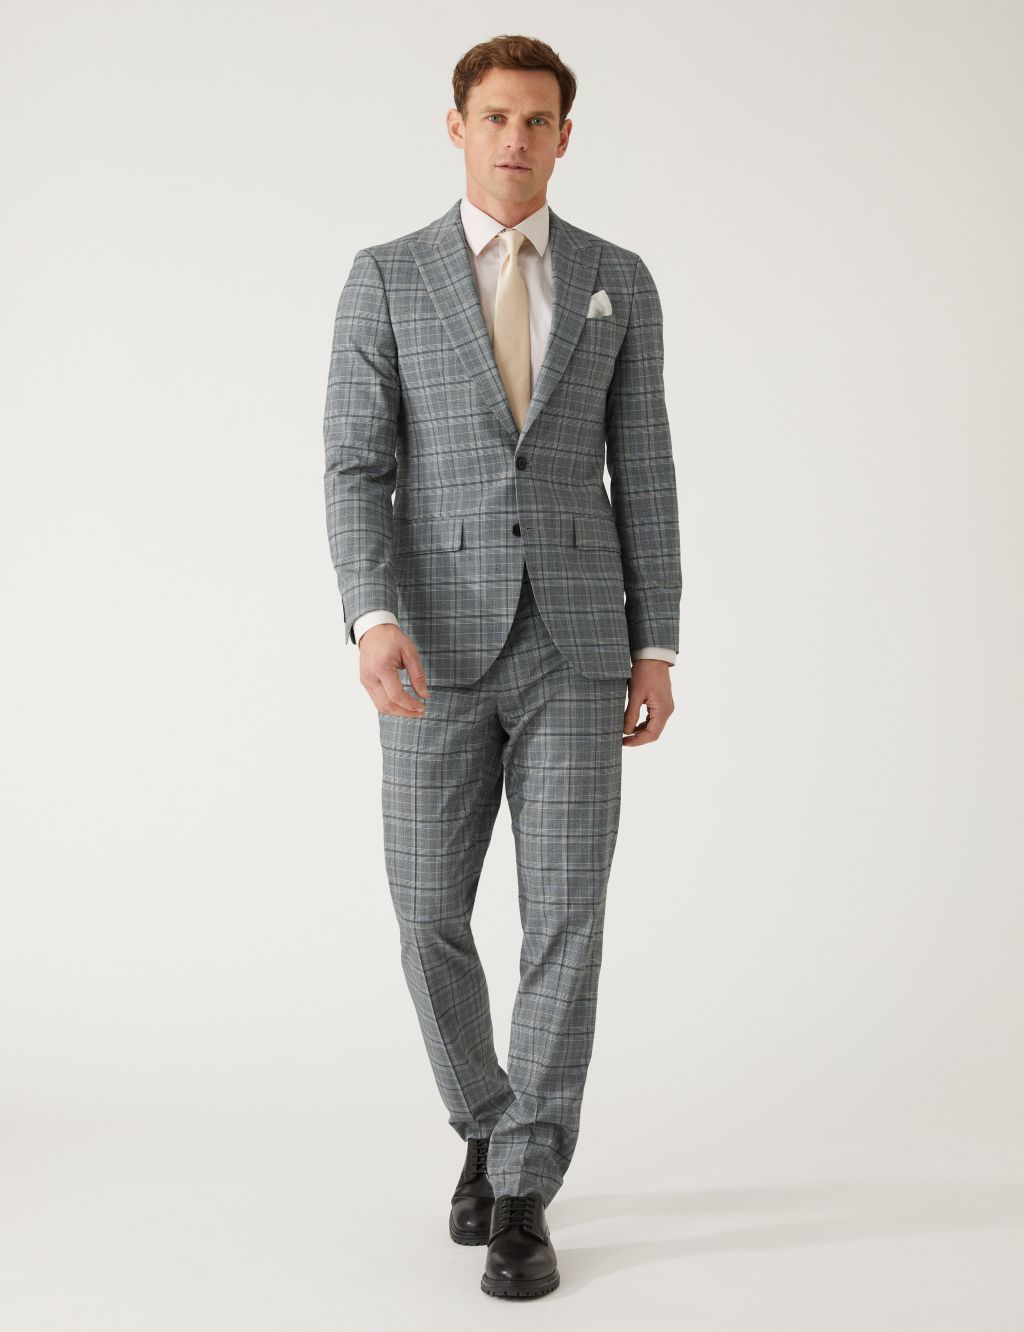 Slim Fit Prince of Wales Check Suit Jacket image 6